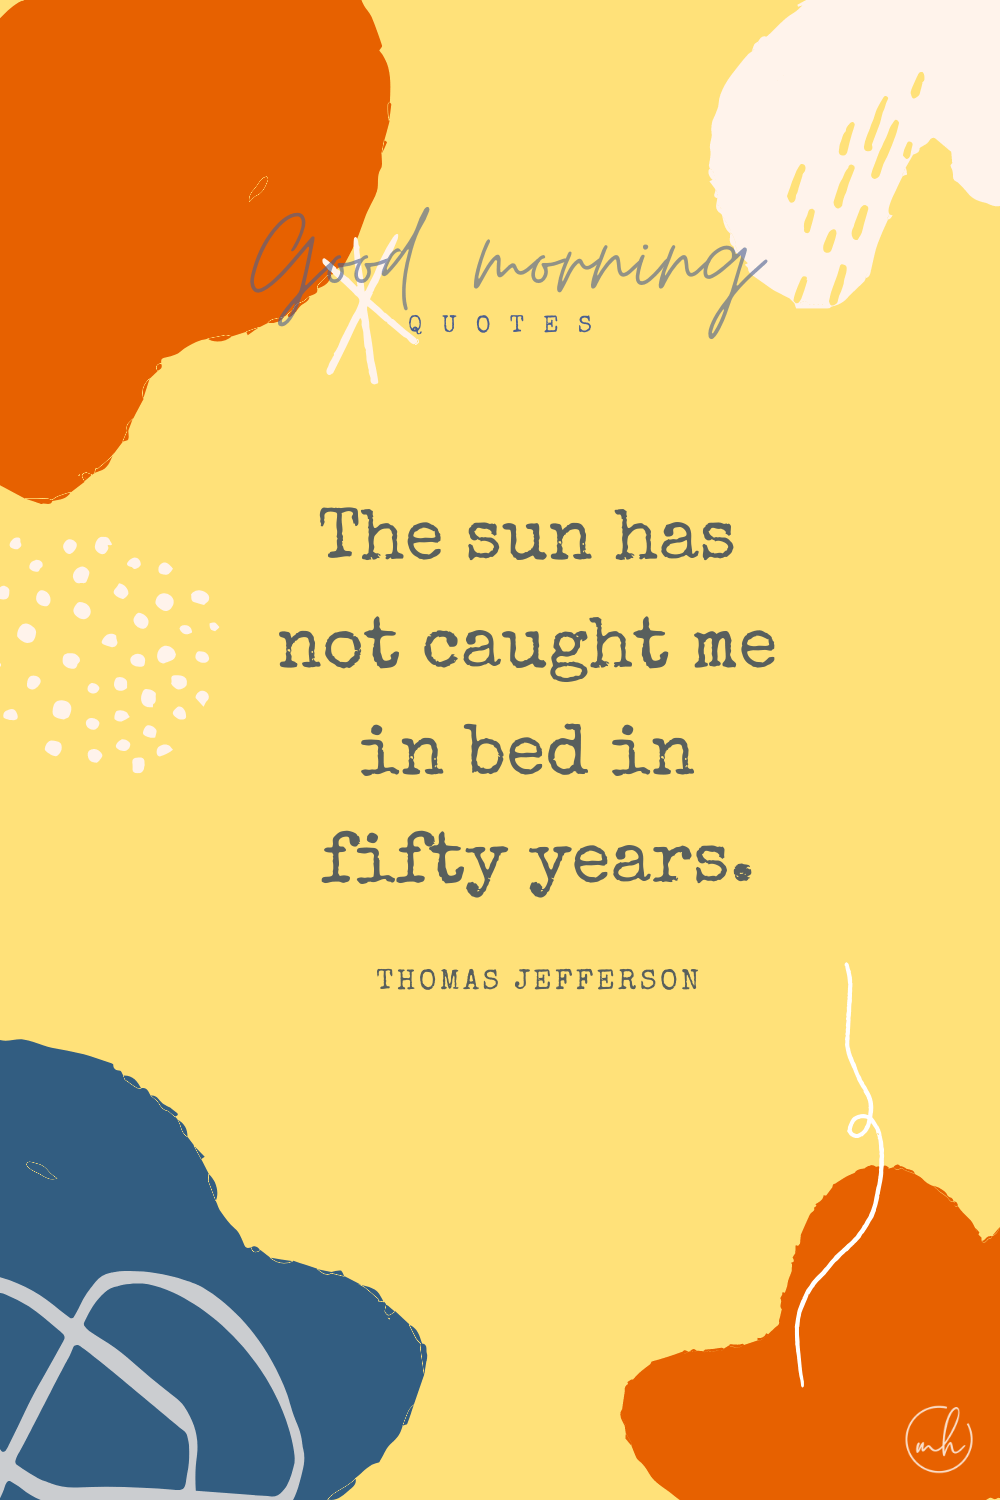 "The sun has not caught me in bed in fifty years." – Thomas Jefferson